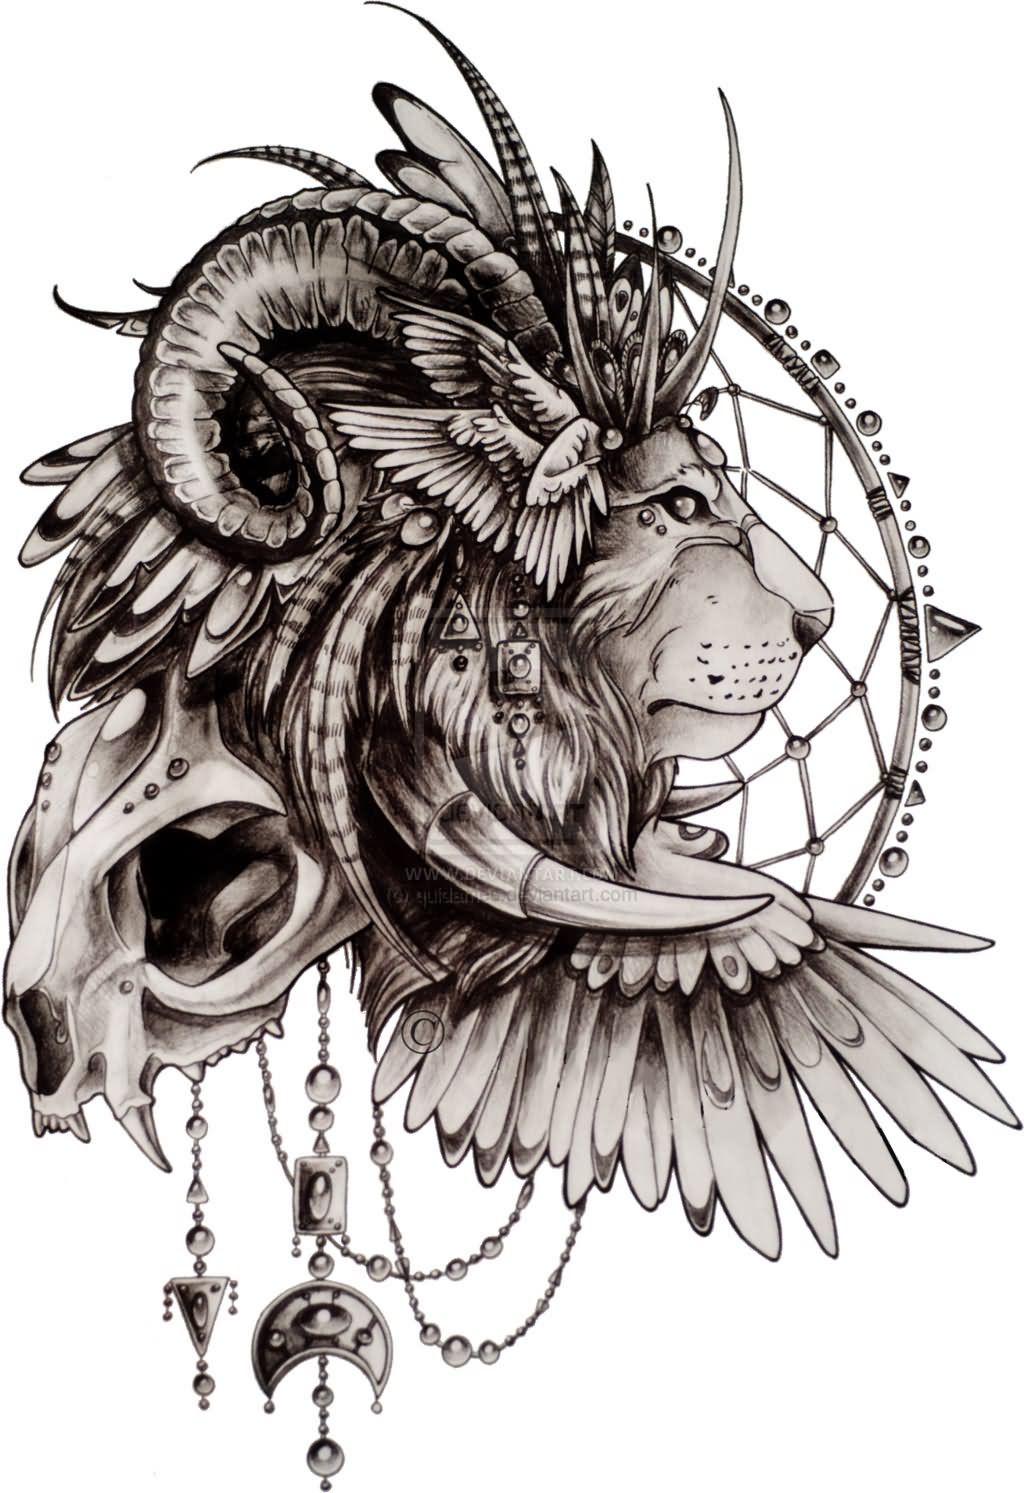 Amazing Lion head with horn, wings and jewels tattoo sketch by Quidames